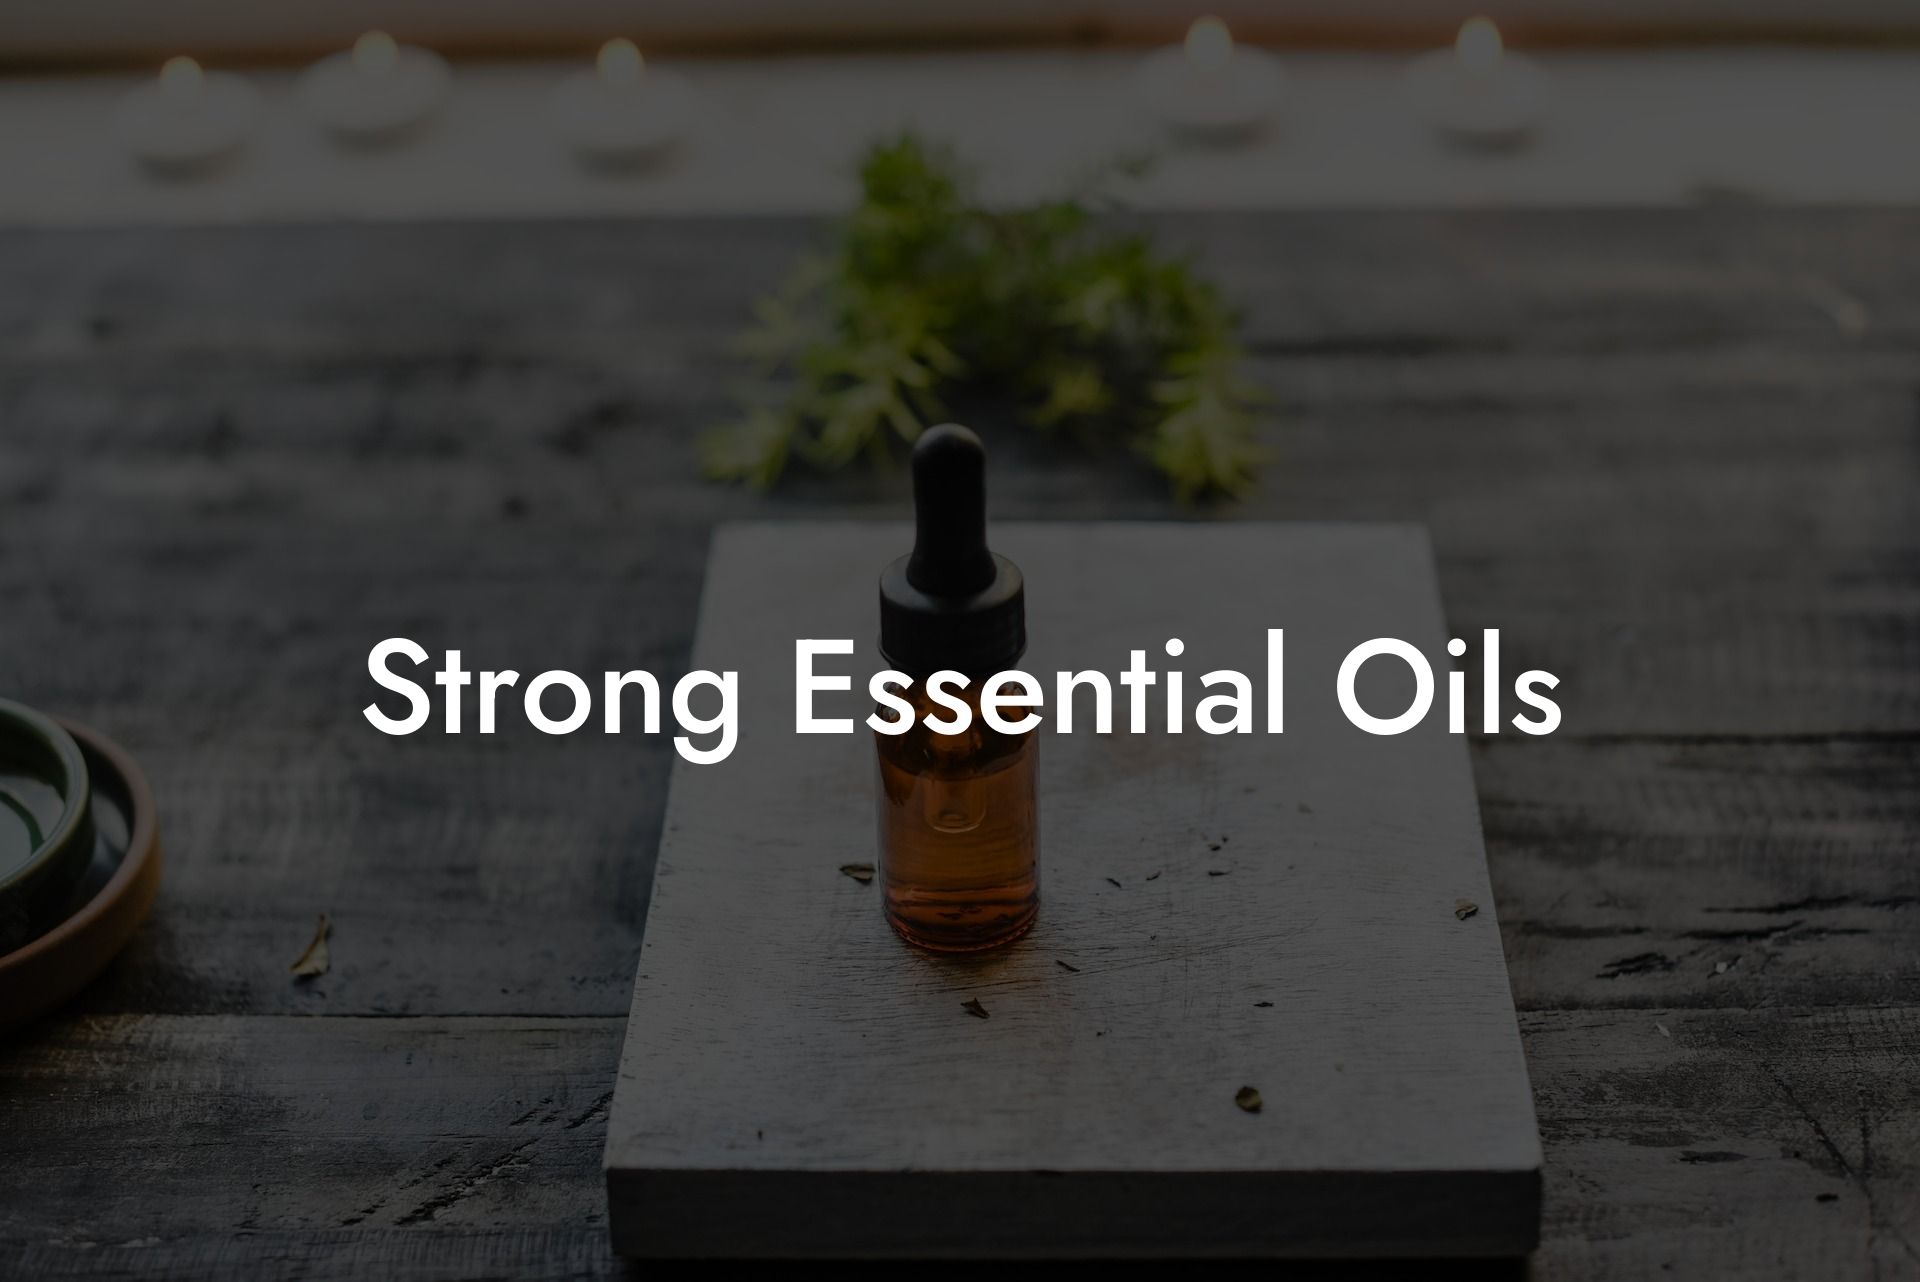 Strong Essential Oils